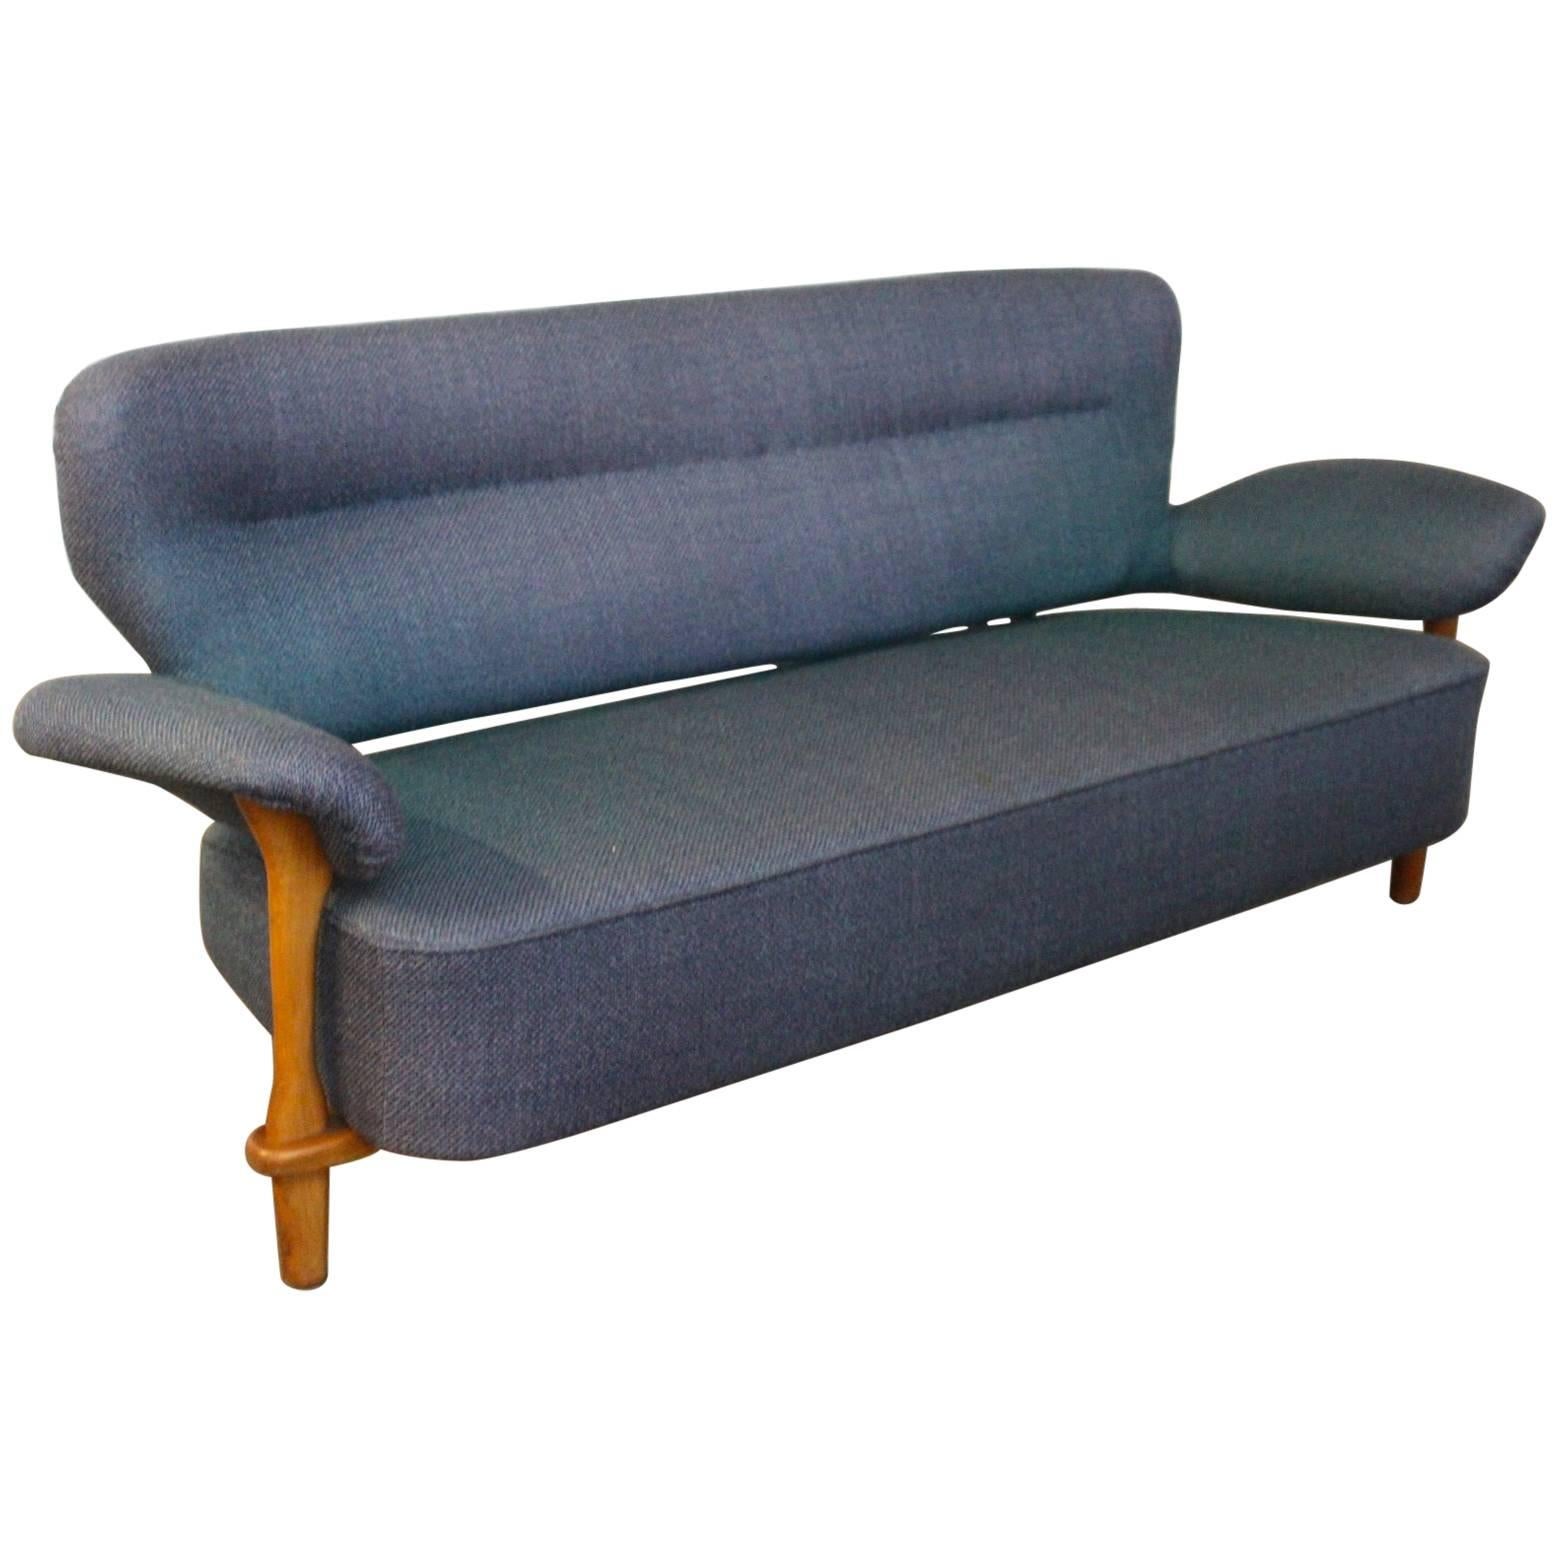 For all items from this dealer please hit the button VIEW ALL FROM SELLER below on this page

Wonderful three-seat sofa by famous Dutch designer Theo Ruth for Artifort, 1950s. This is a rare model 109 Artifort sofa in a beautiful spotless blue